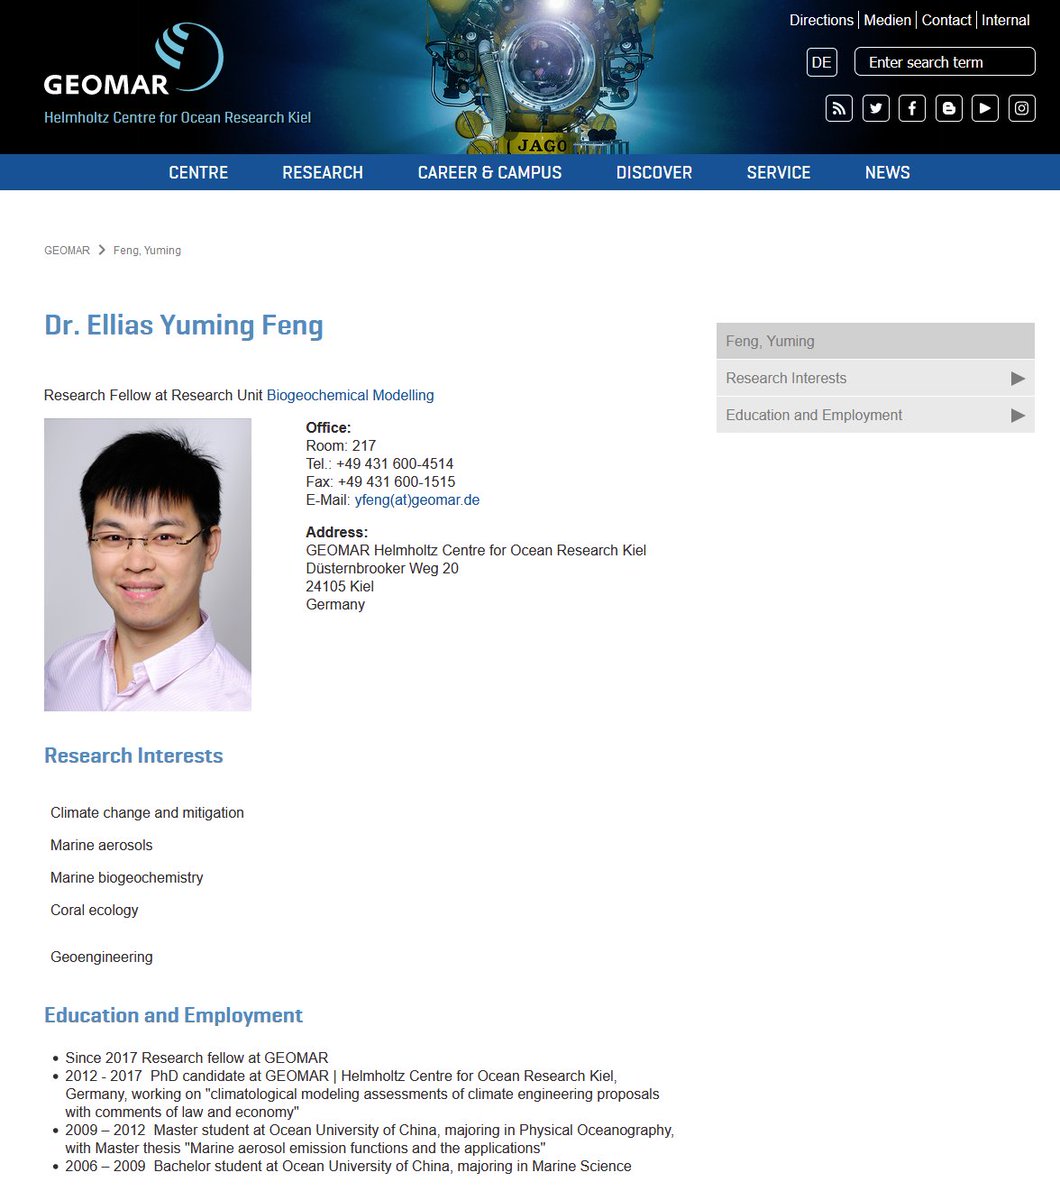  @NavinaHeyden's husband, Ellias Yuming Feng. Chinese National. His father was in the PLA. Yuming was a researcher at GEOMAR in Kiel. A ghost since register 10 years ago, 4 posts 2014 and 1 in 2017, all science oriented. then vacuum. On 5.6.20 he started posting CCP propaganda.